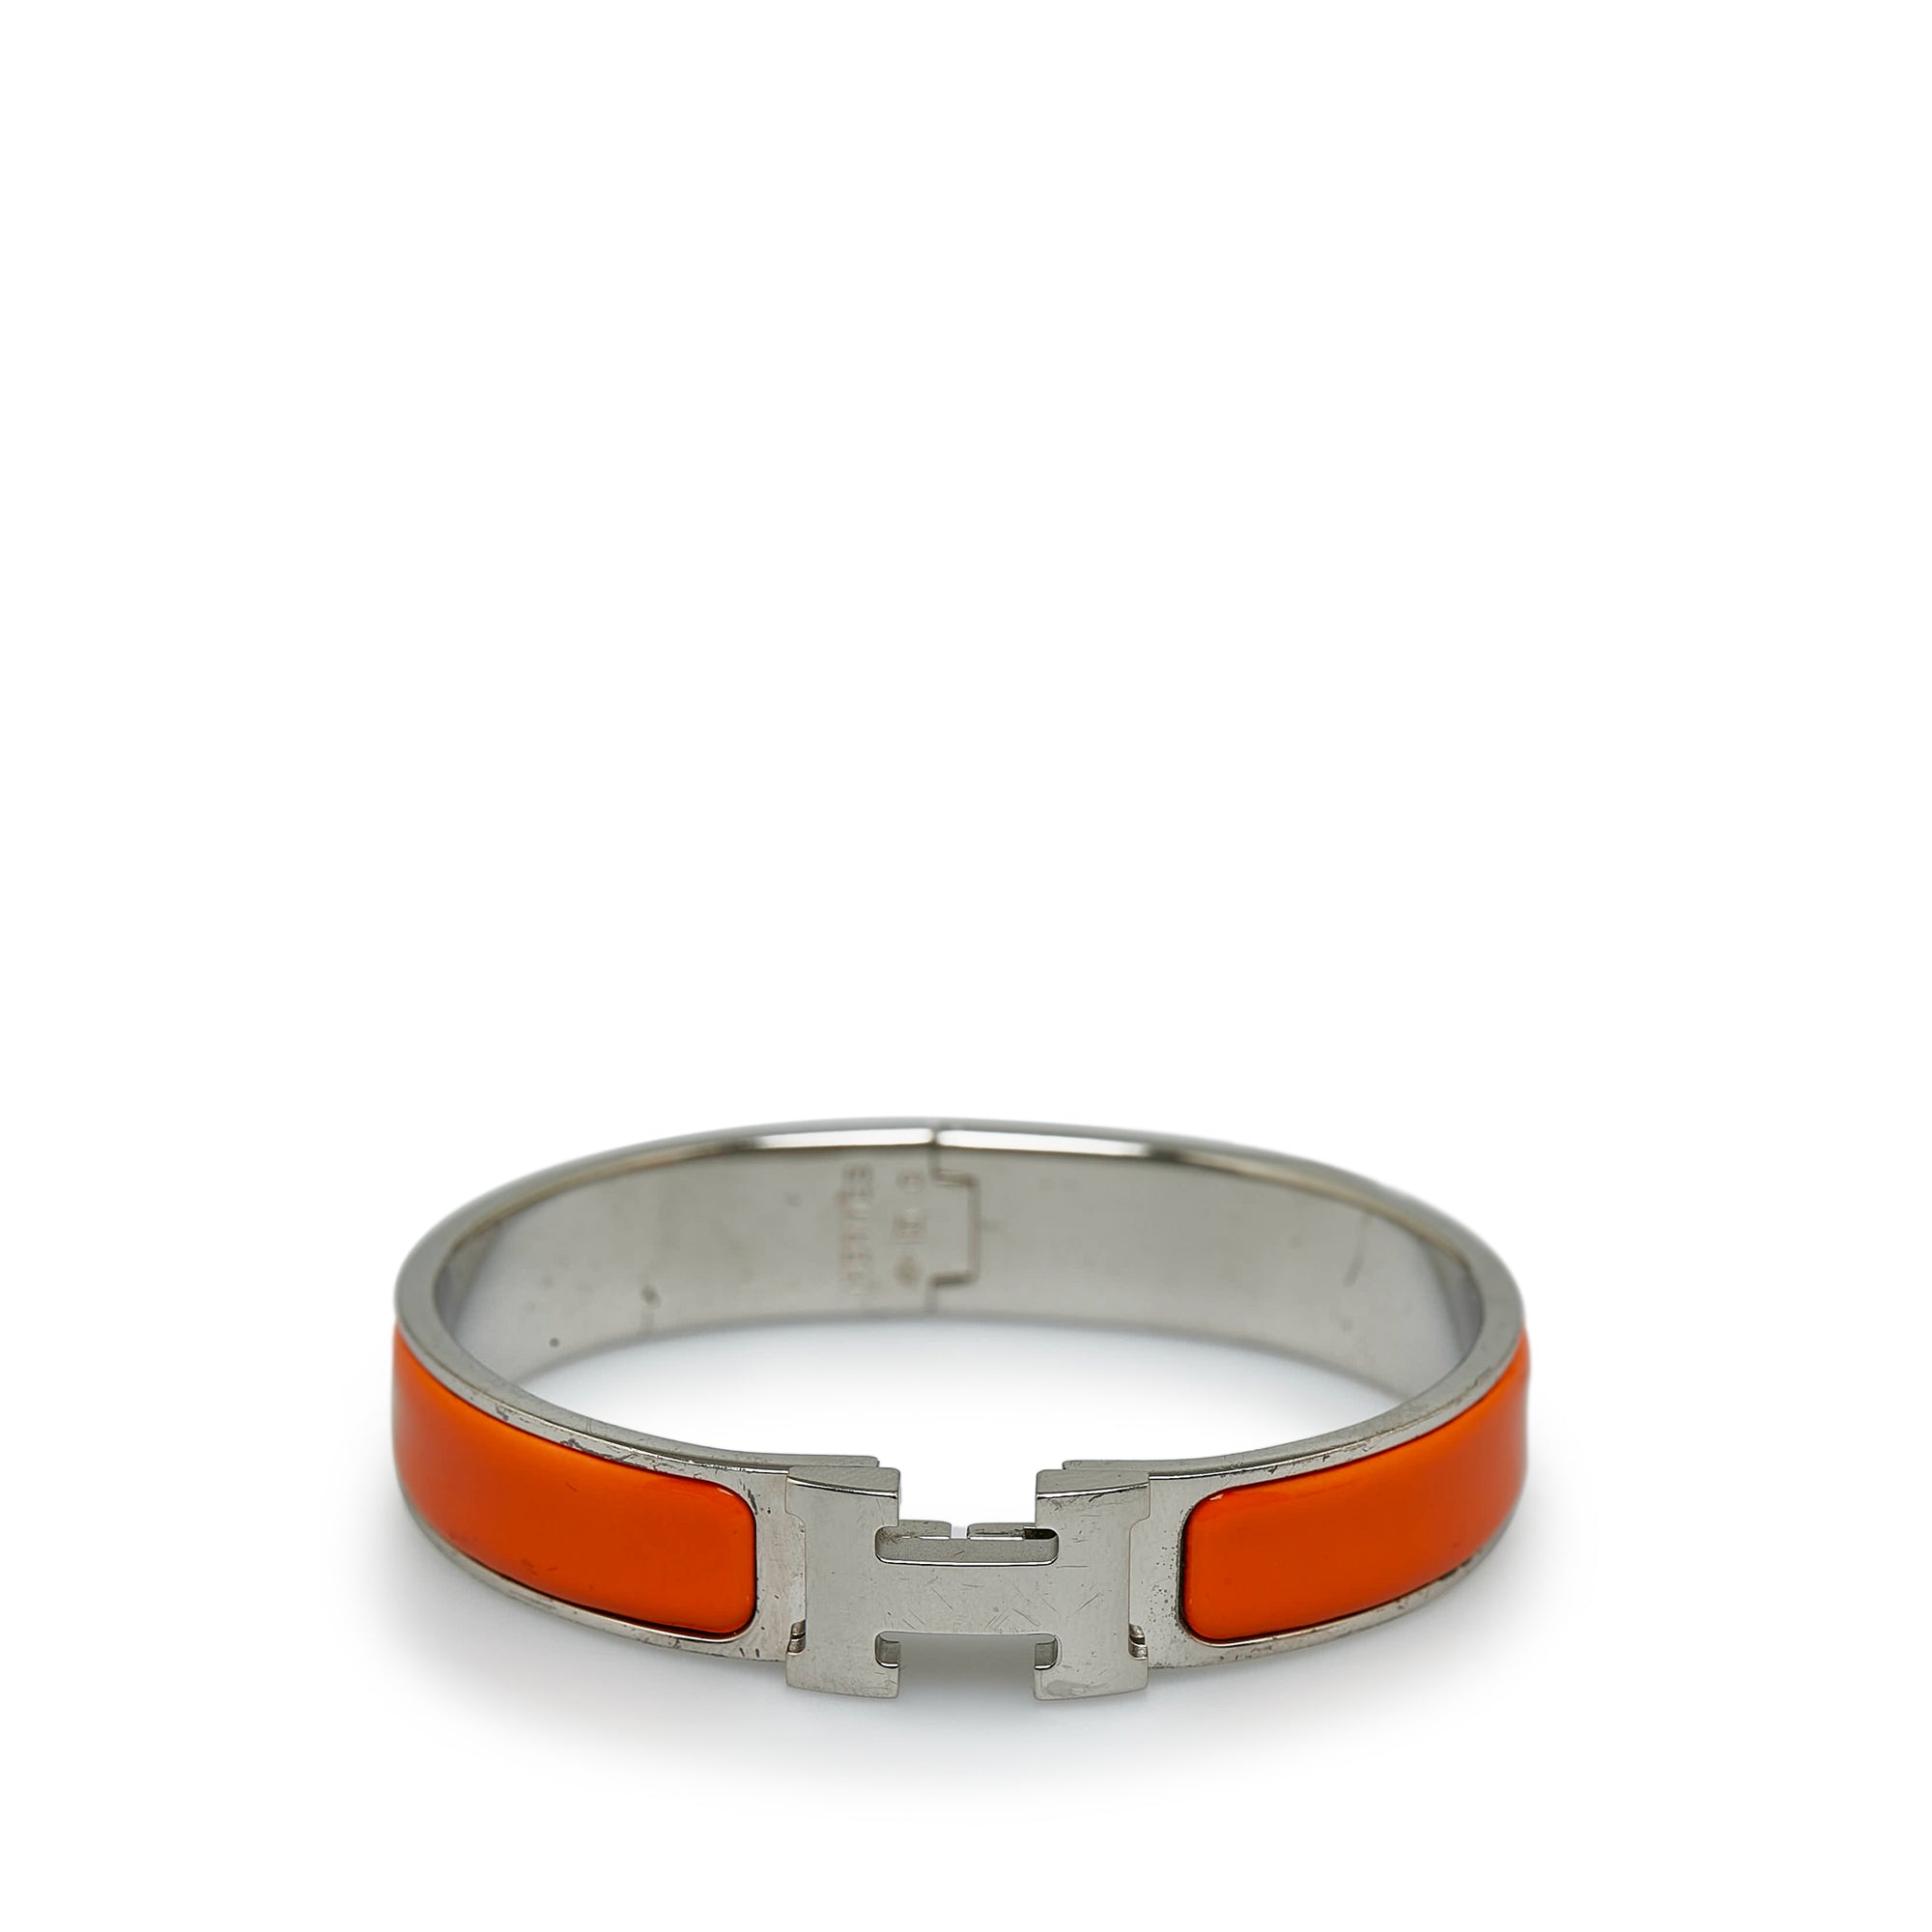 Expert Advice About The Jewelry Market  Hermes jewelry, Hermes bracelet, Hermes  bracelet black